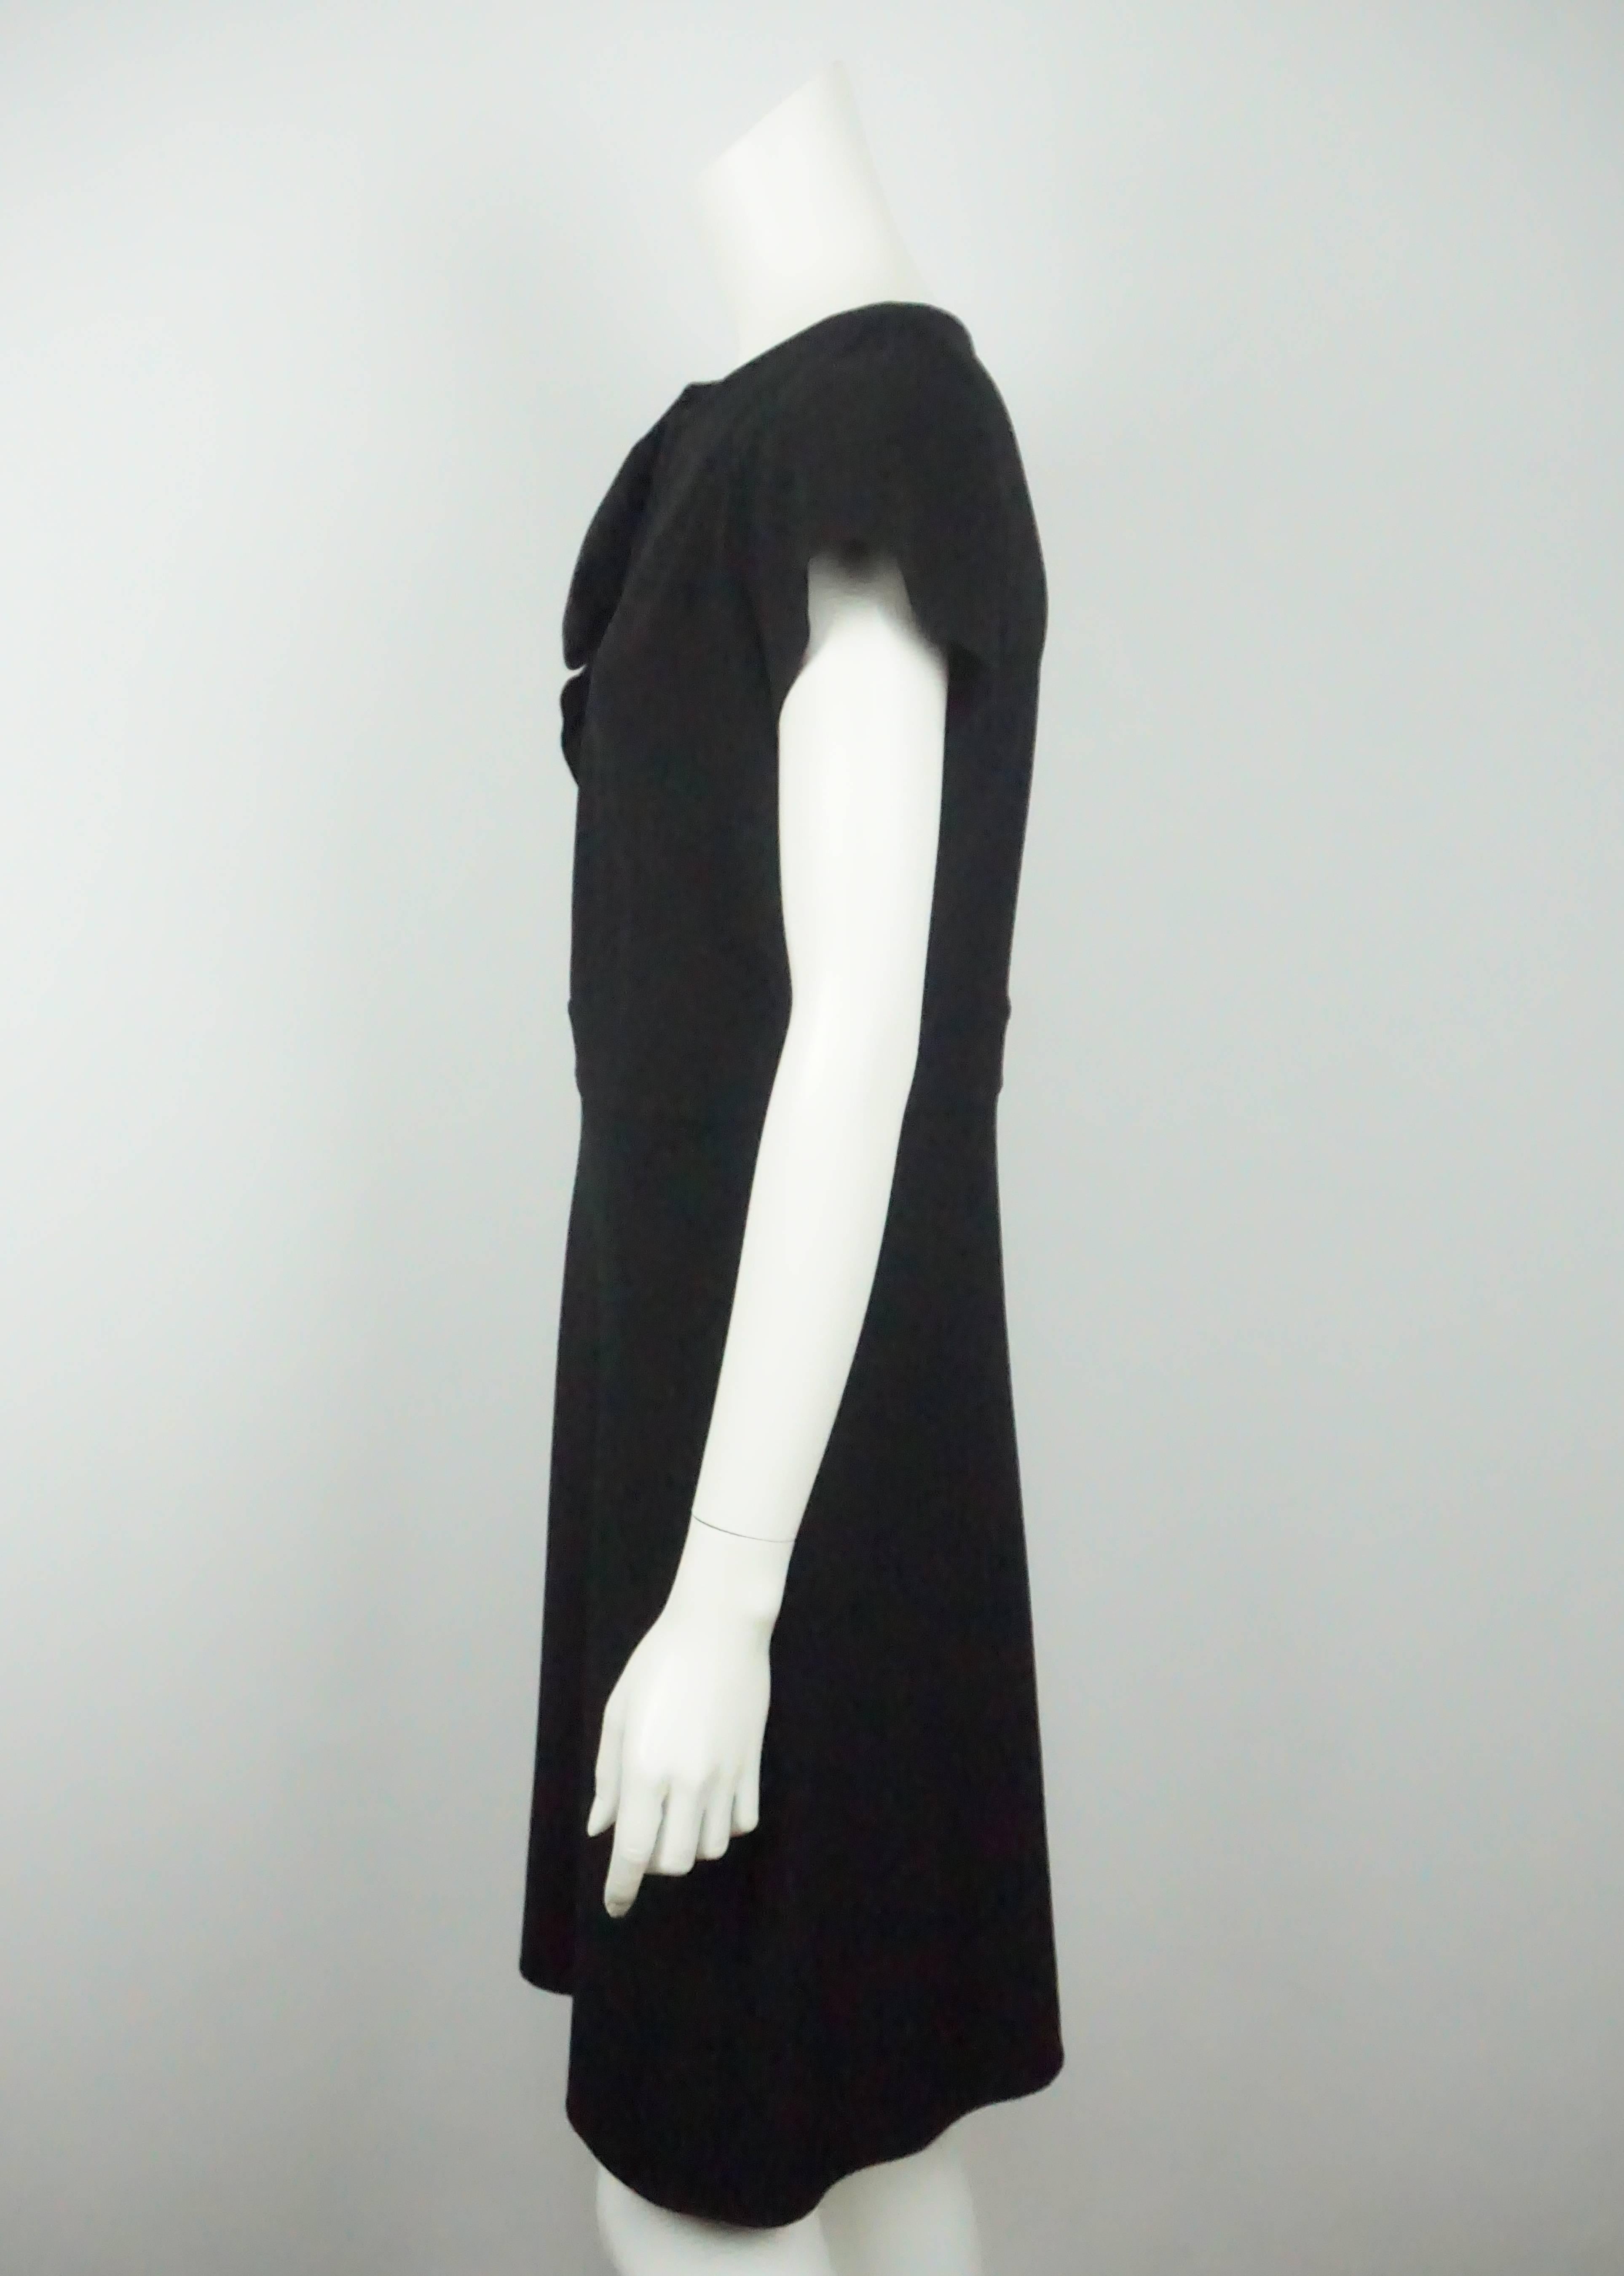 Valentino Black Short Sleeve Dress w/ Rose Detail - 8  This viscose and nylon dress is in good condition. The dress has a beautiful rose detail that is made from the same material as the dress. It has a long side zipper and there are four hook and